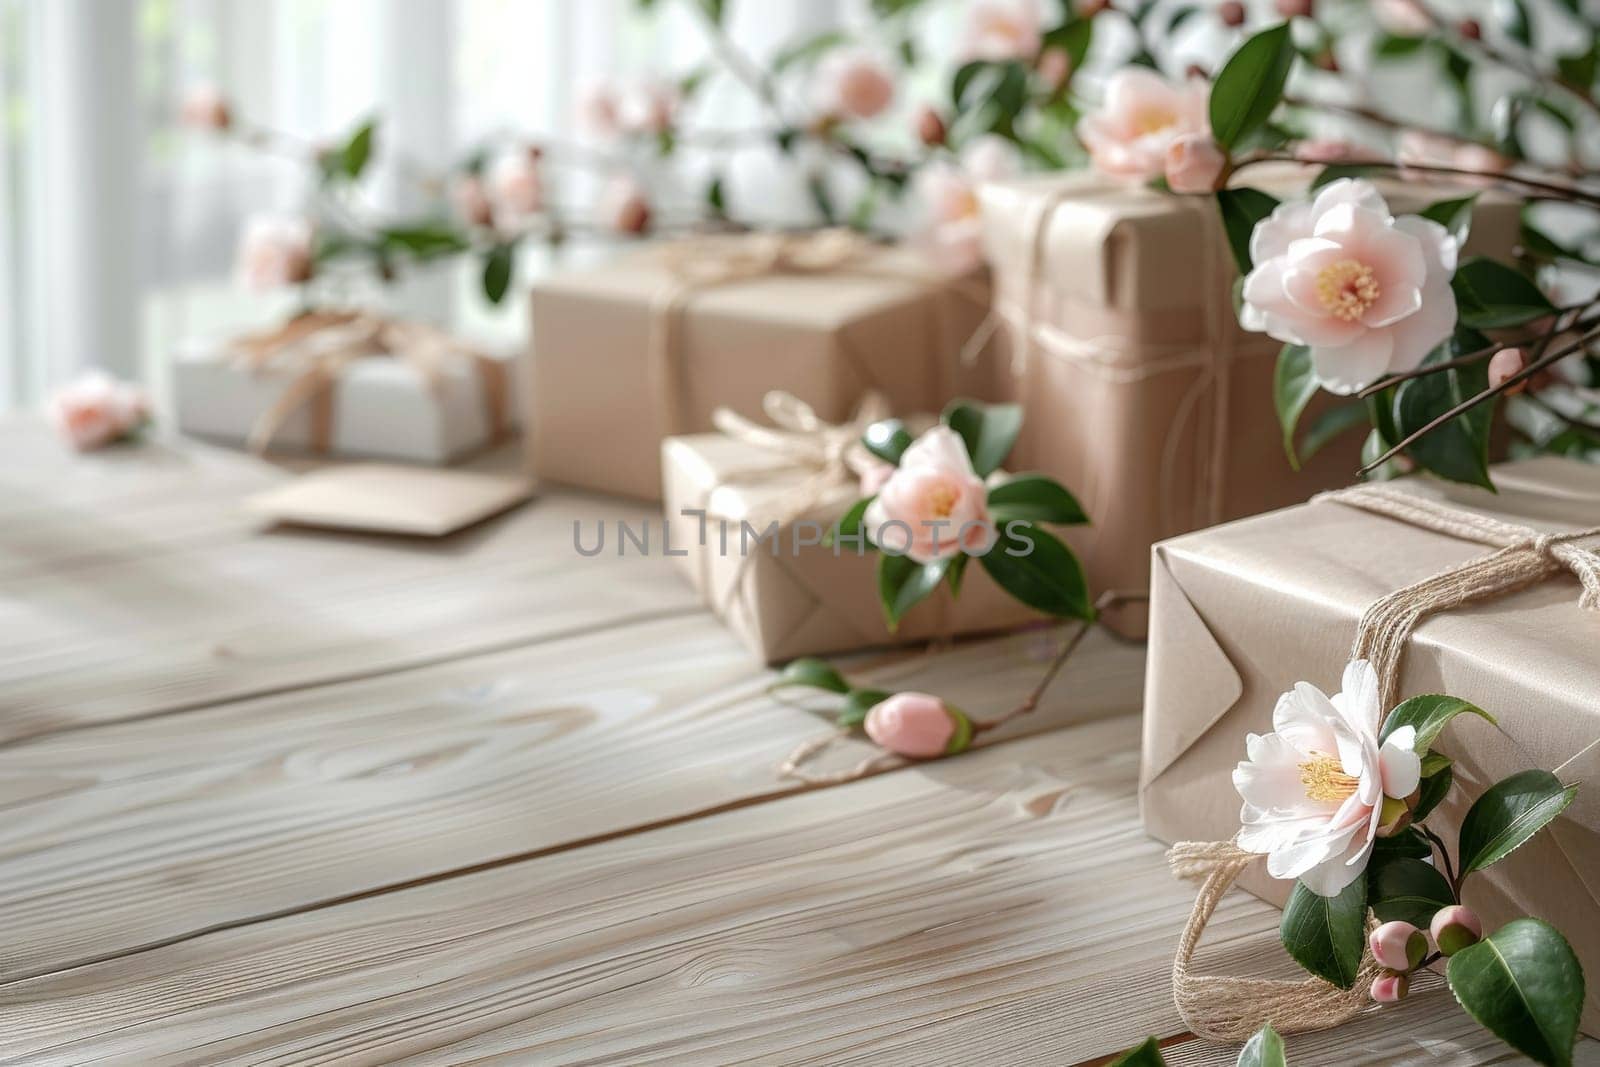 A wooden table with a bunch of brown boxes and flowers on it. The boxes are wrapped in brown paper and tied with string. The flowers are white and arranged in a way that they complement the boxes